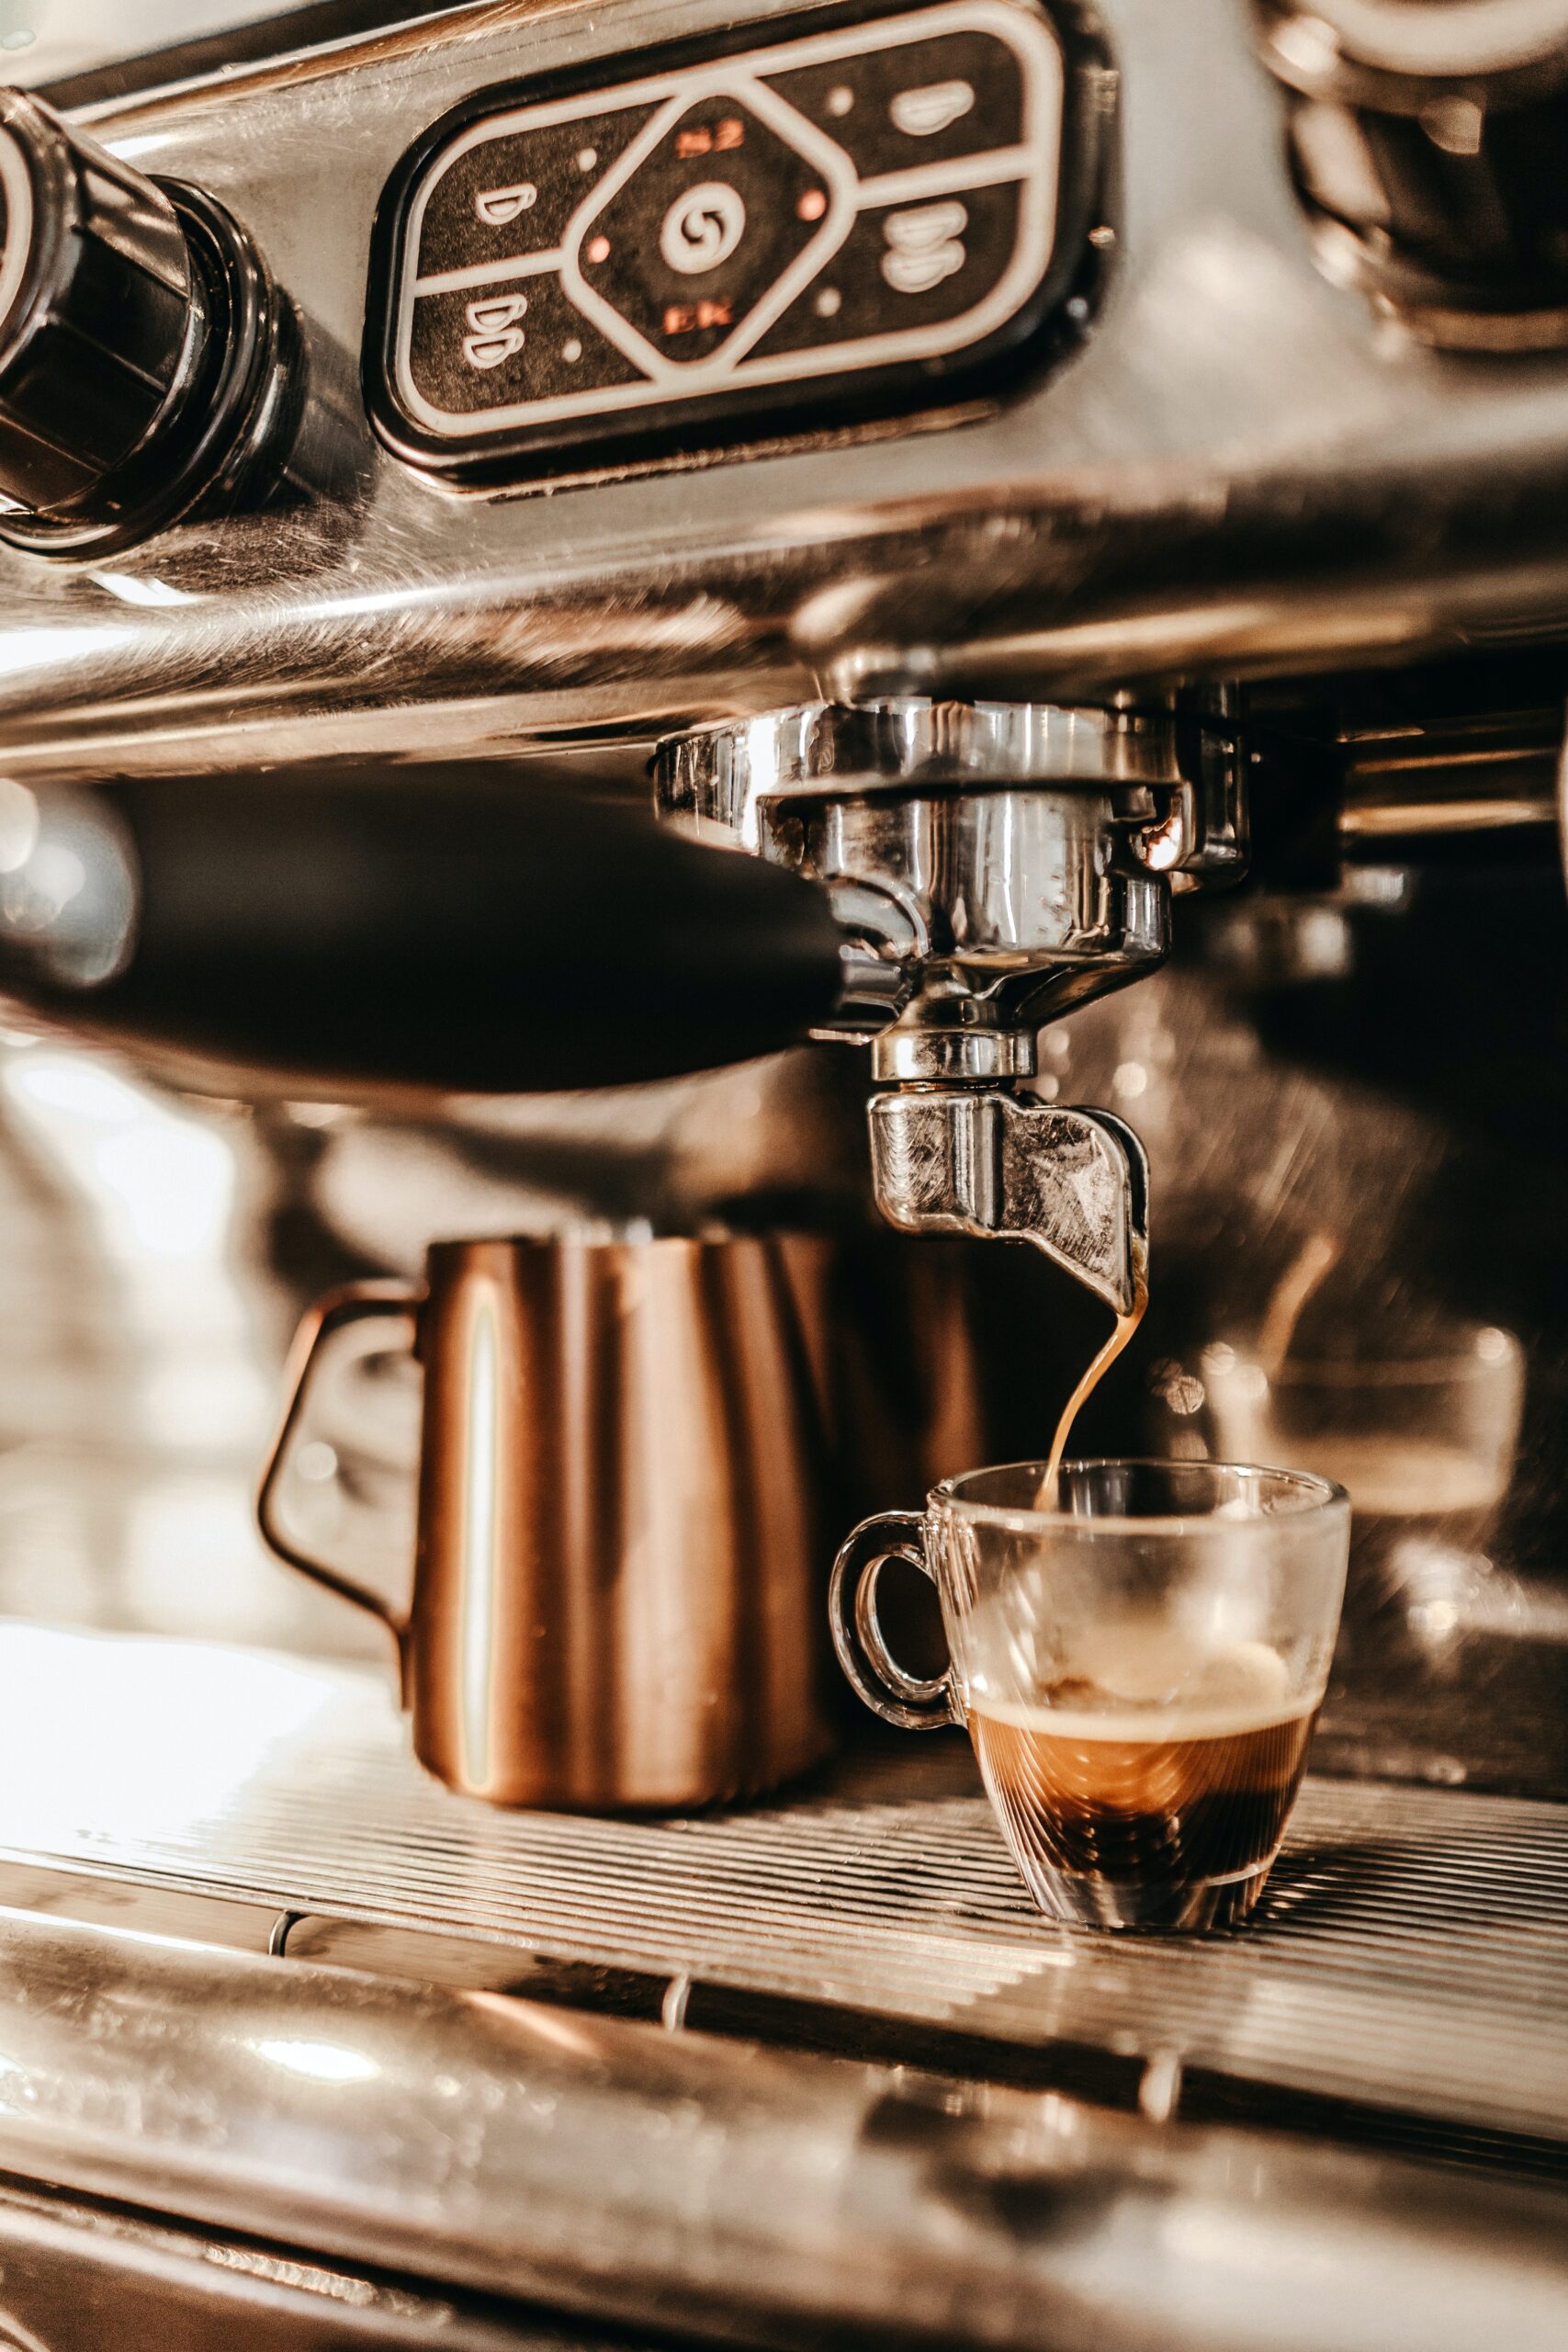 Professional cafe equipment service and repair near me